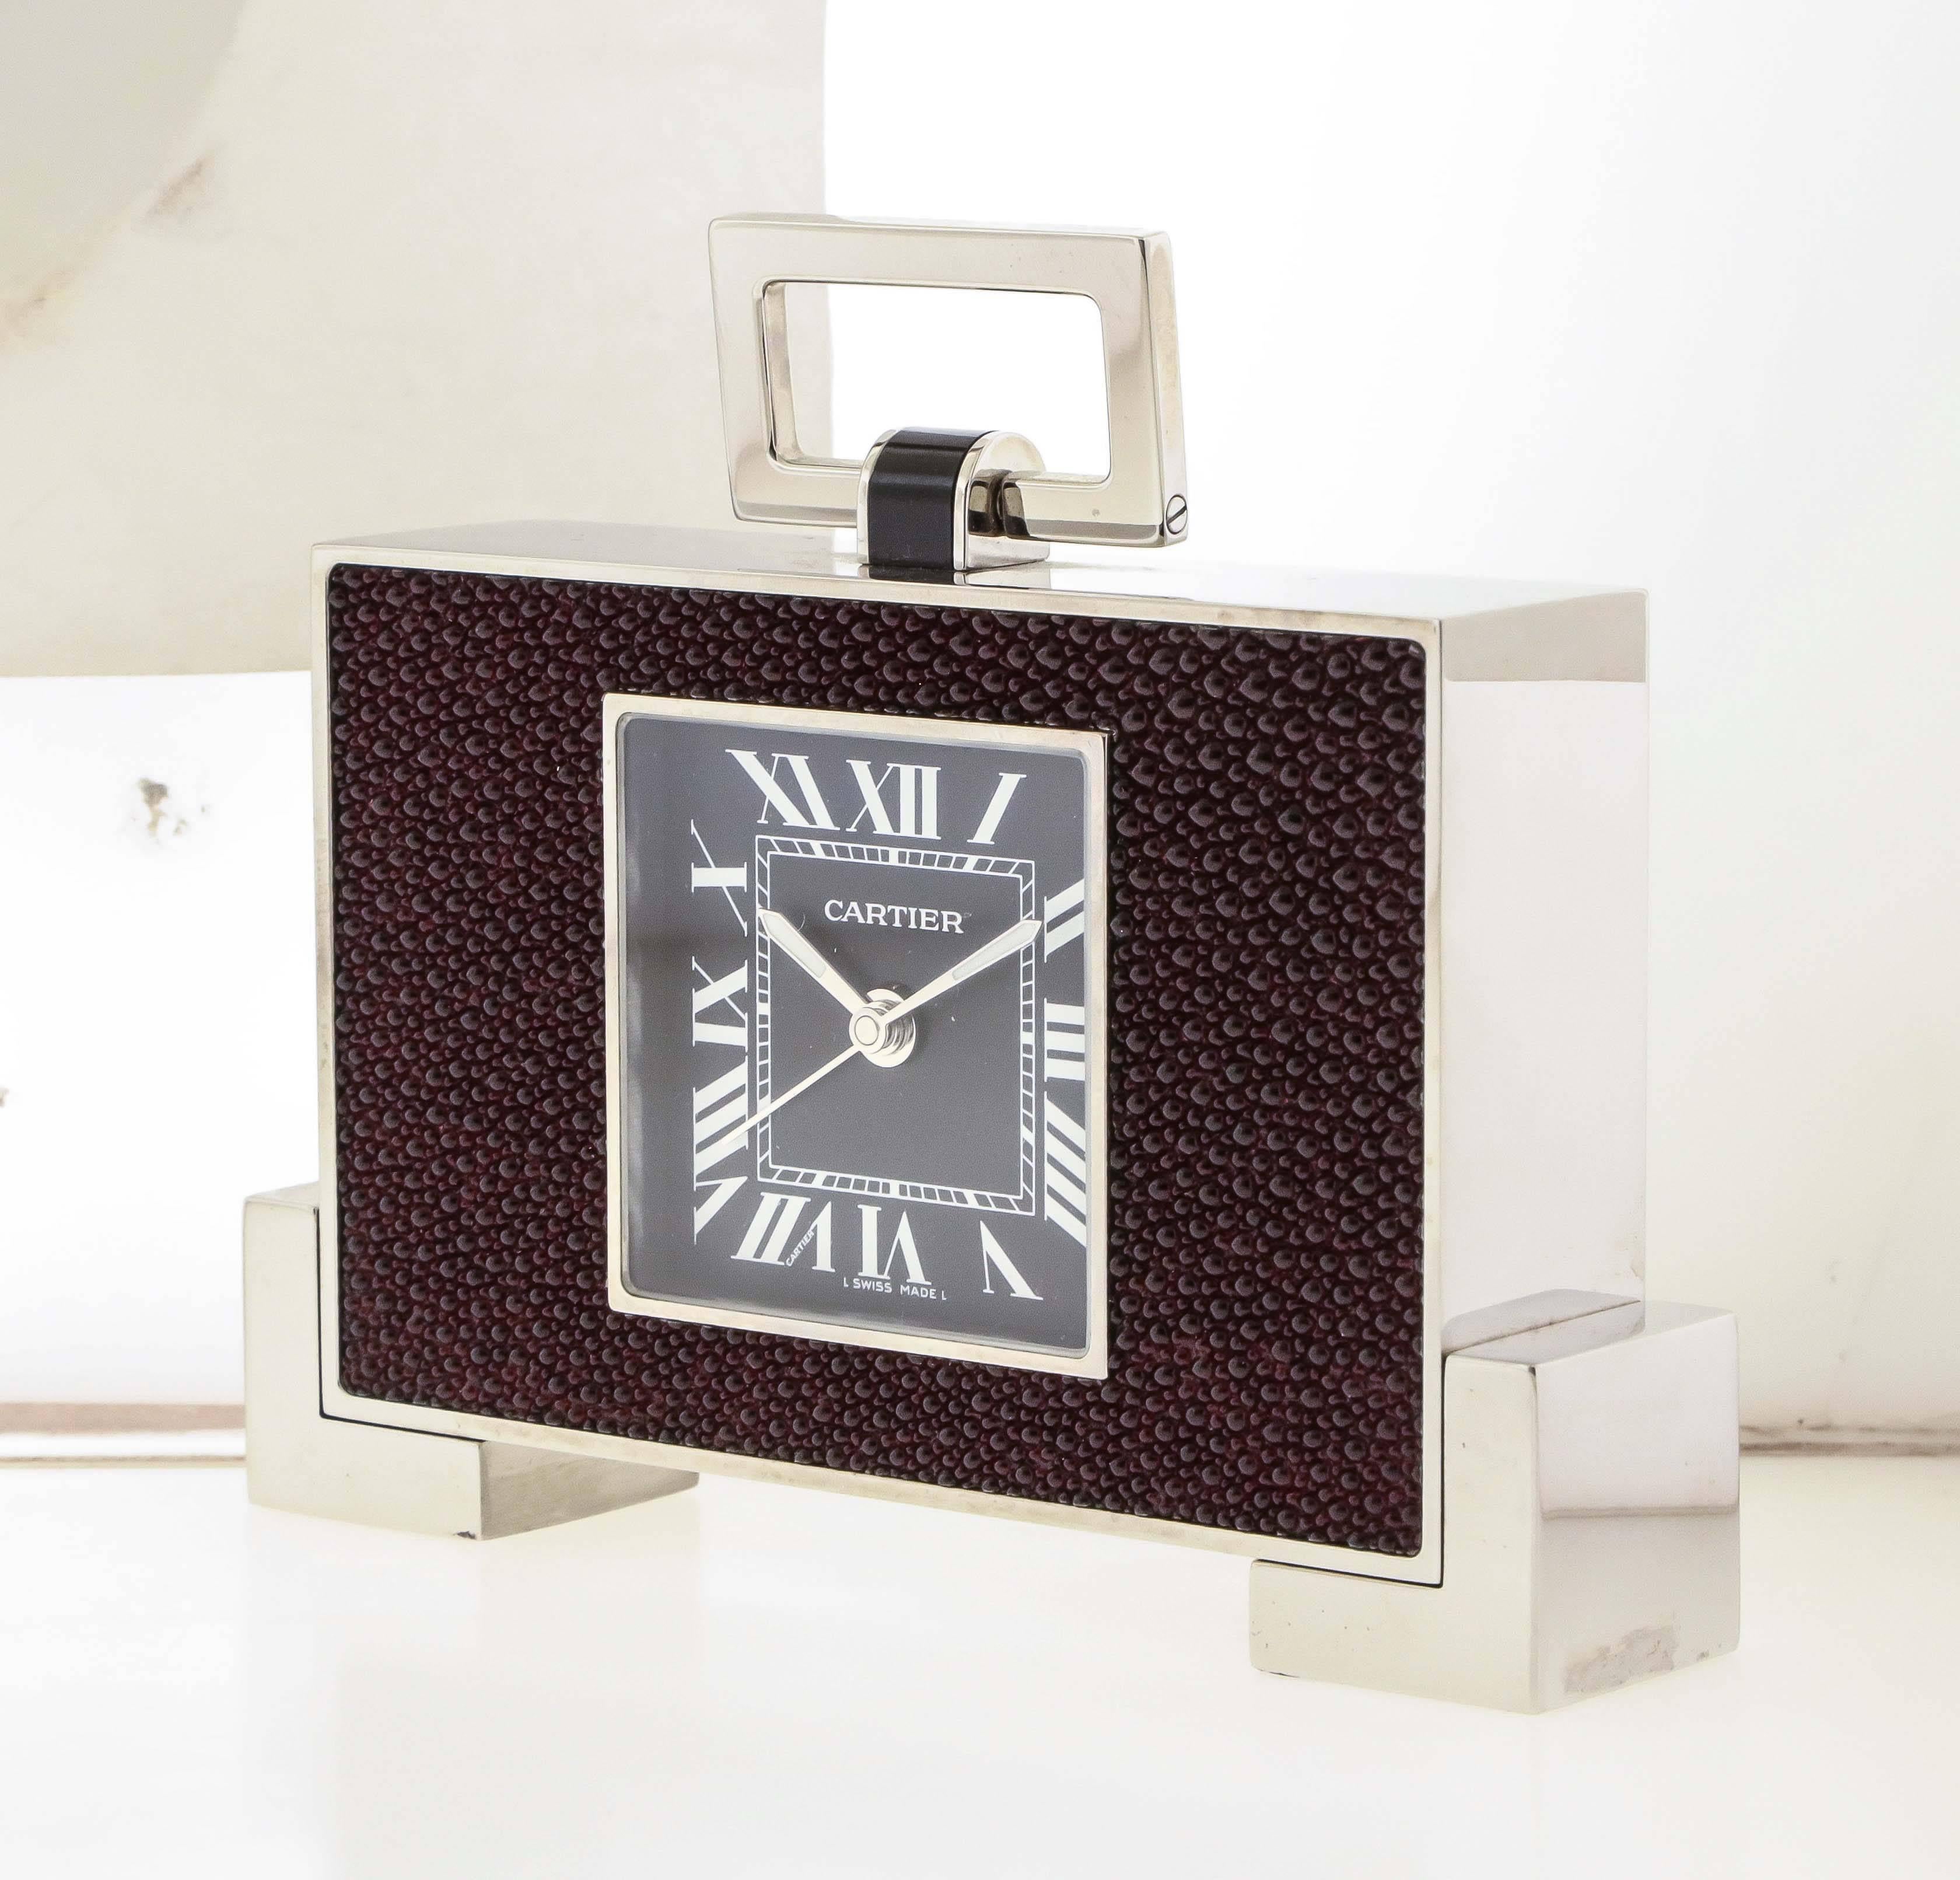 Cartier Art Deco style chromed black enamel and burgundy shagreen travelling alarm clock, circa 2005, with folding rectangular loop handle, square black dial with Roman numerals, L-shaped block feet, measures 4